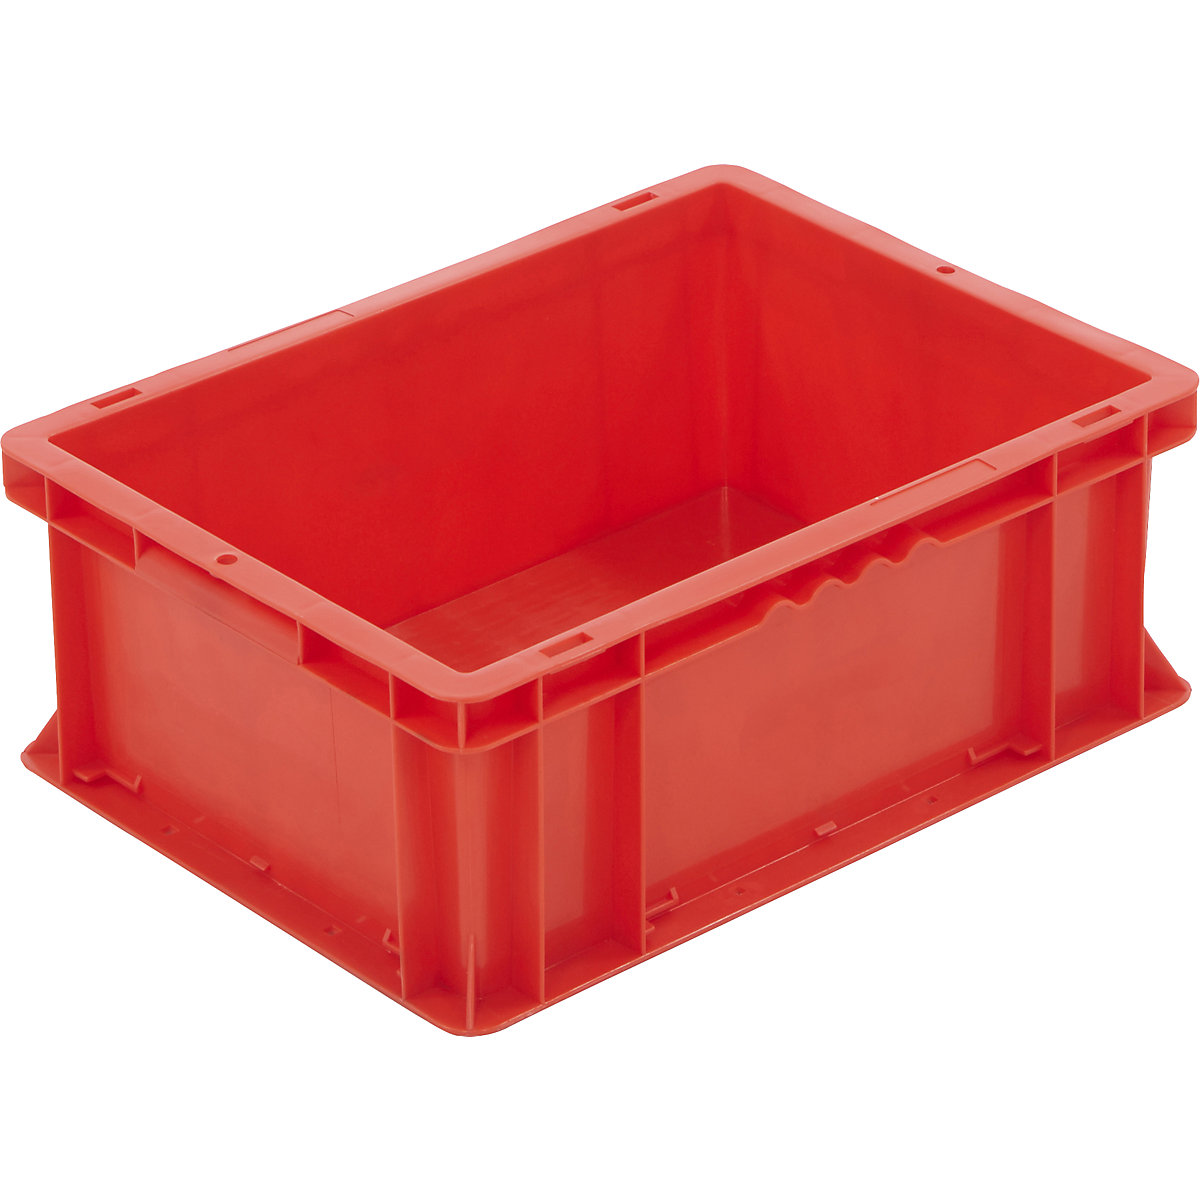 Euro stacking container, capacity 14 litre, red-6